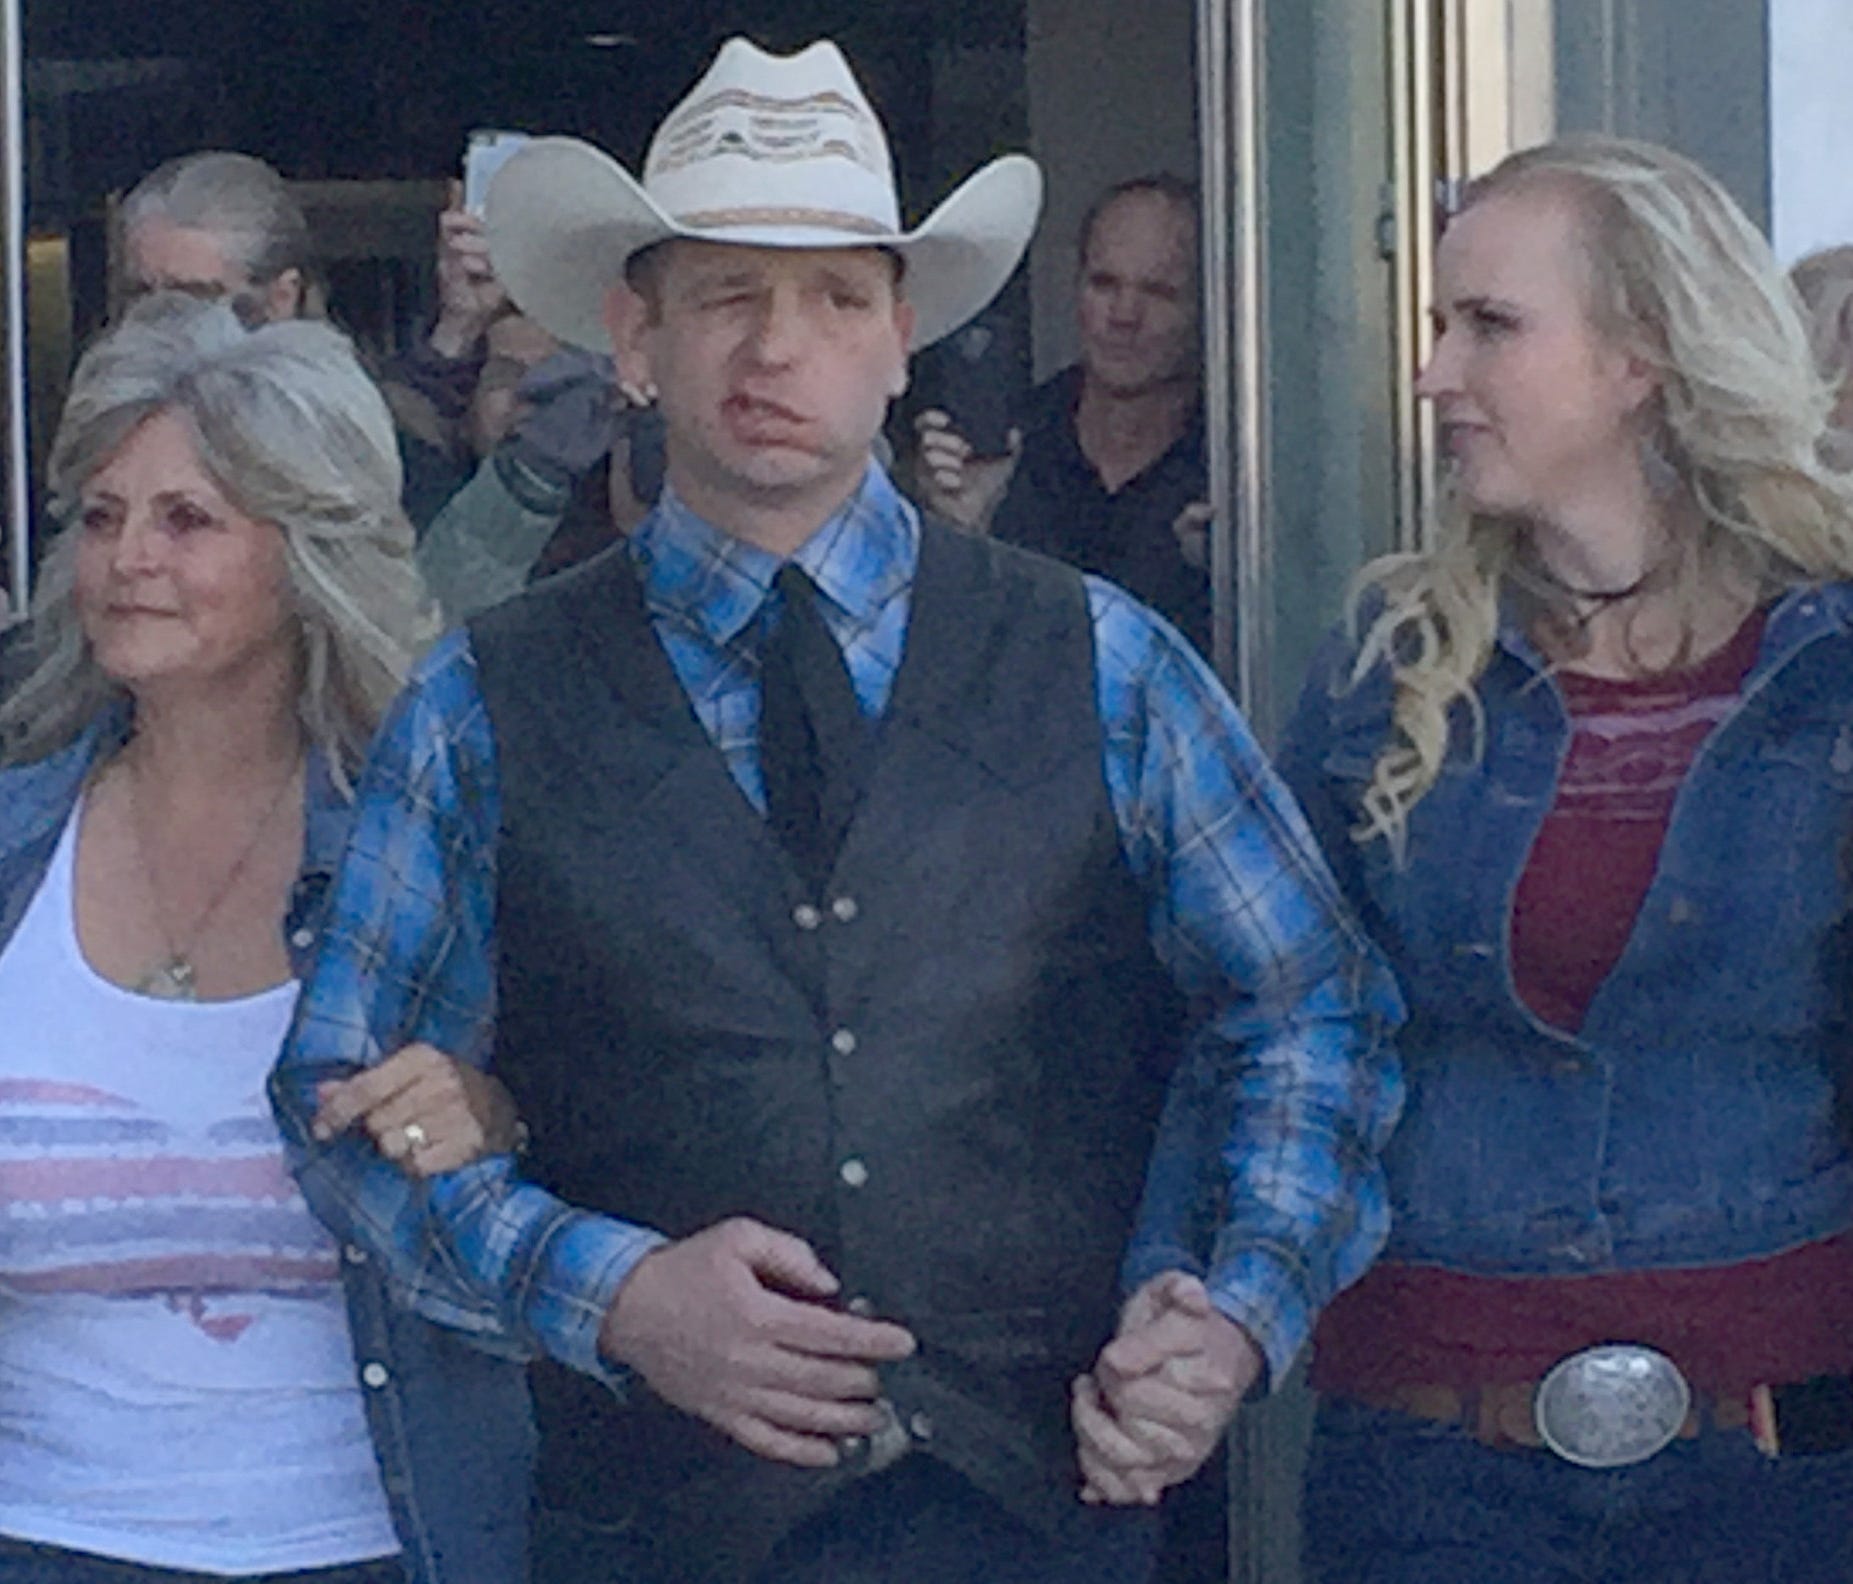 Ryan Bundy walks out of the federal courthouse in Las Vegas on Dec. 20, 2017.